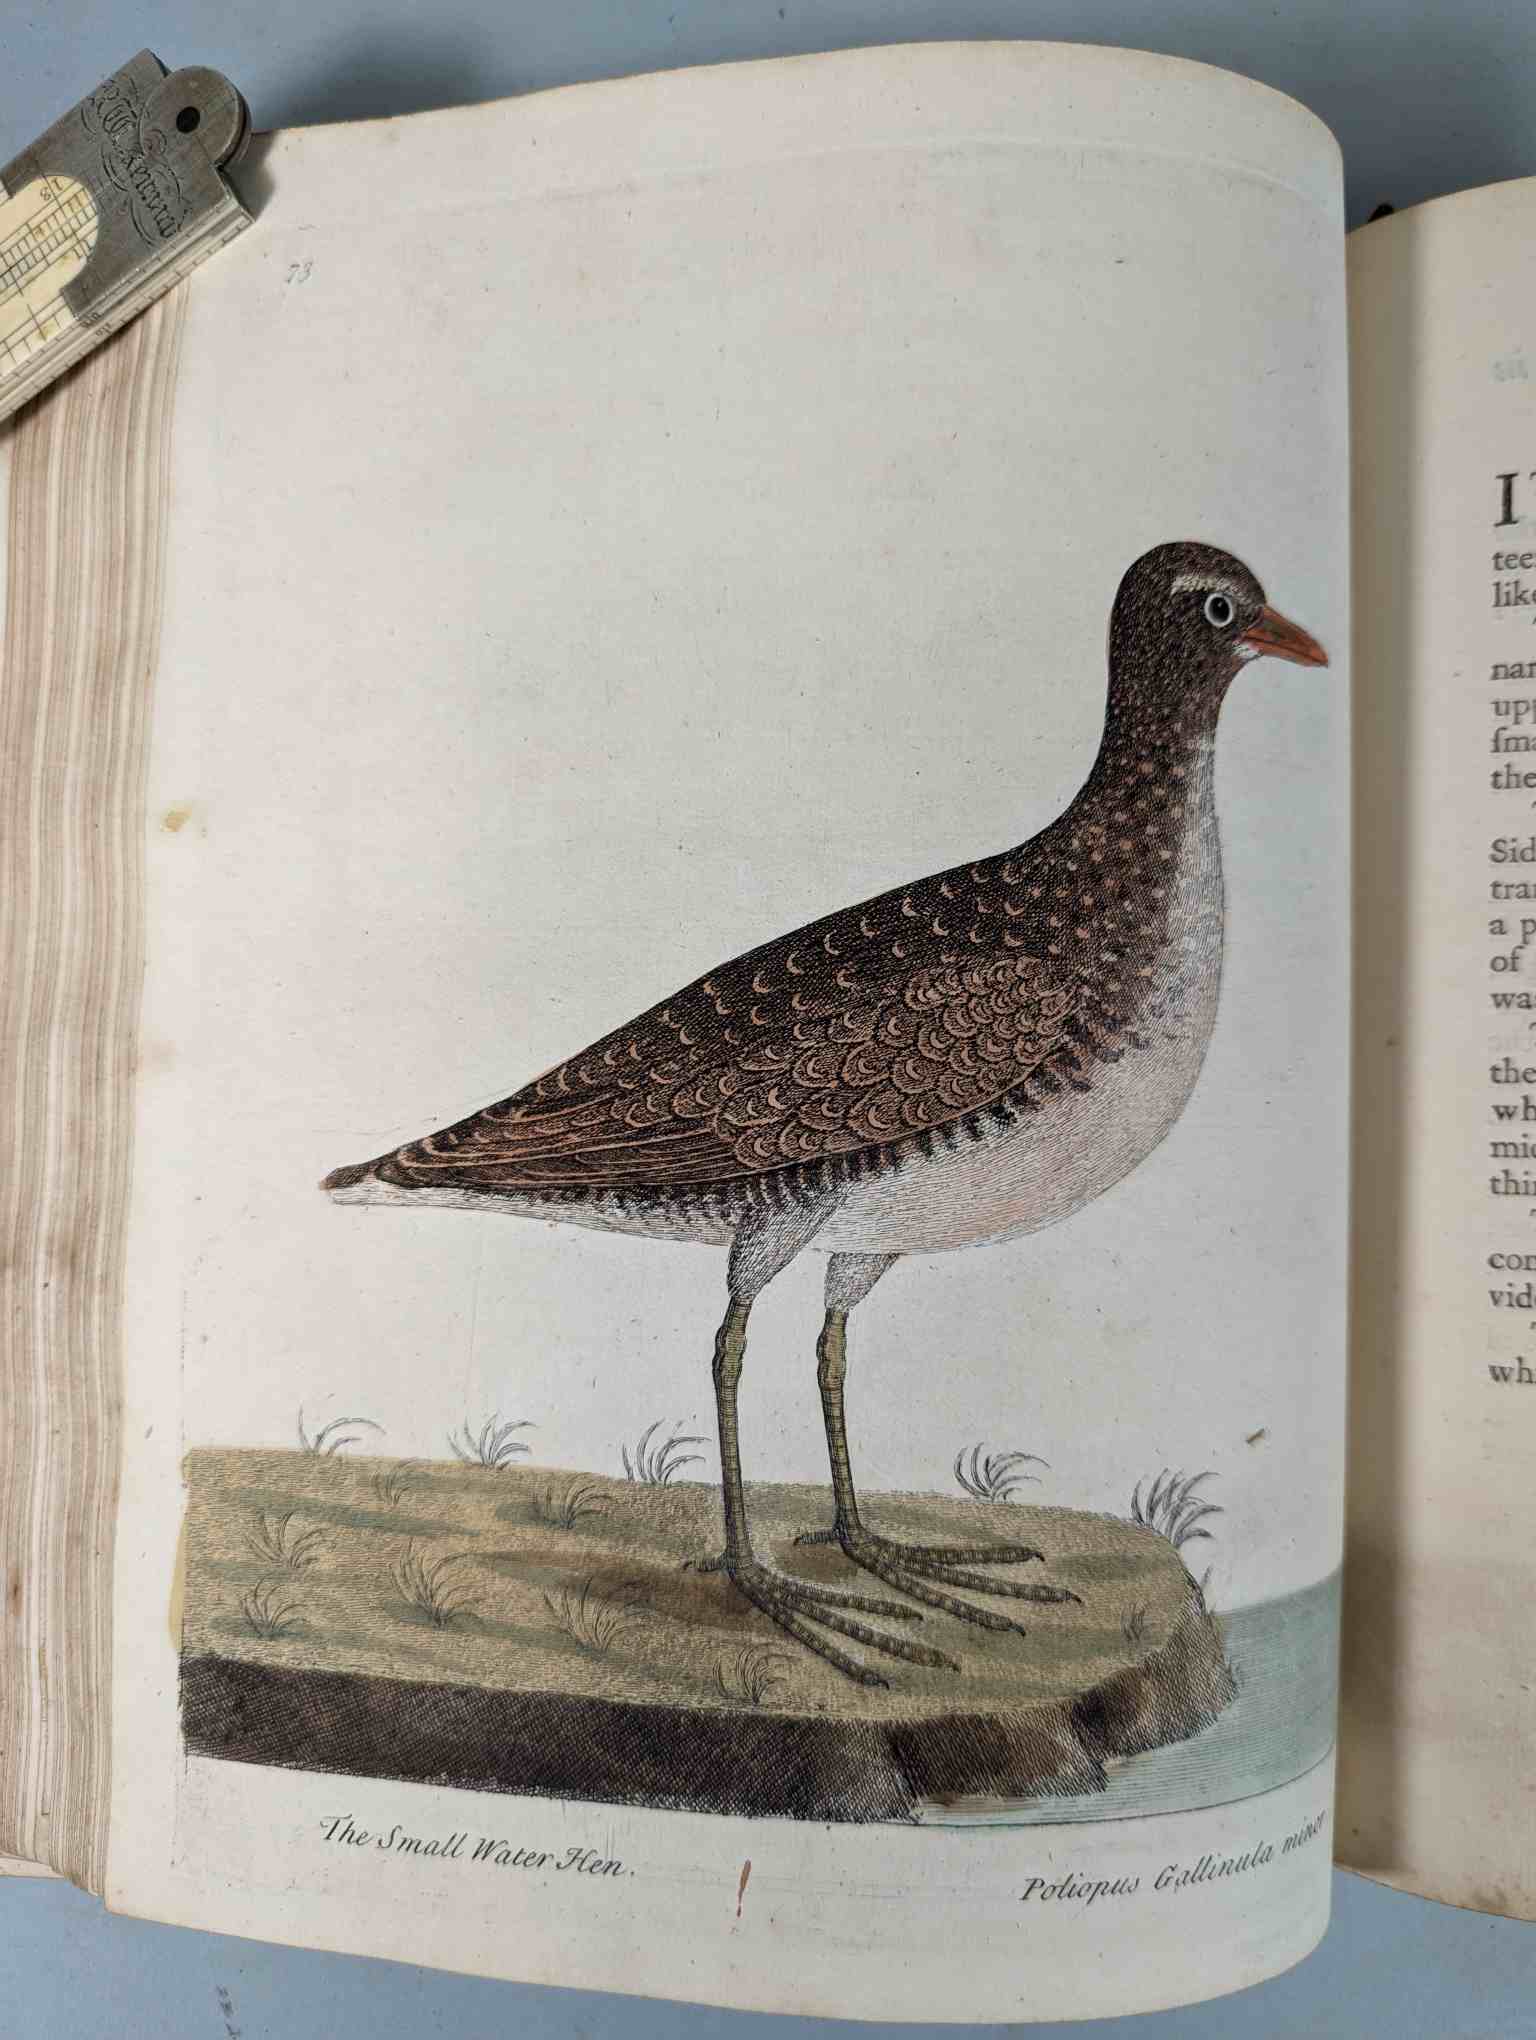 ALBIN, Eleazar. A Natural History of Birds, to which are added, Notes and Observations by W. - Image 177 of 208